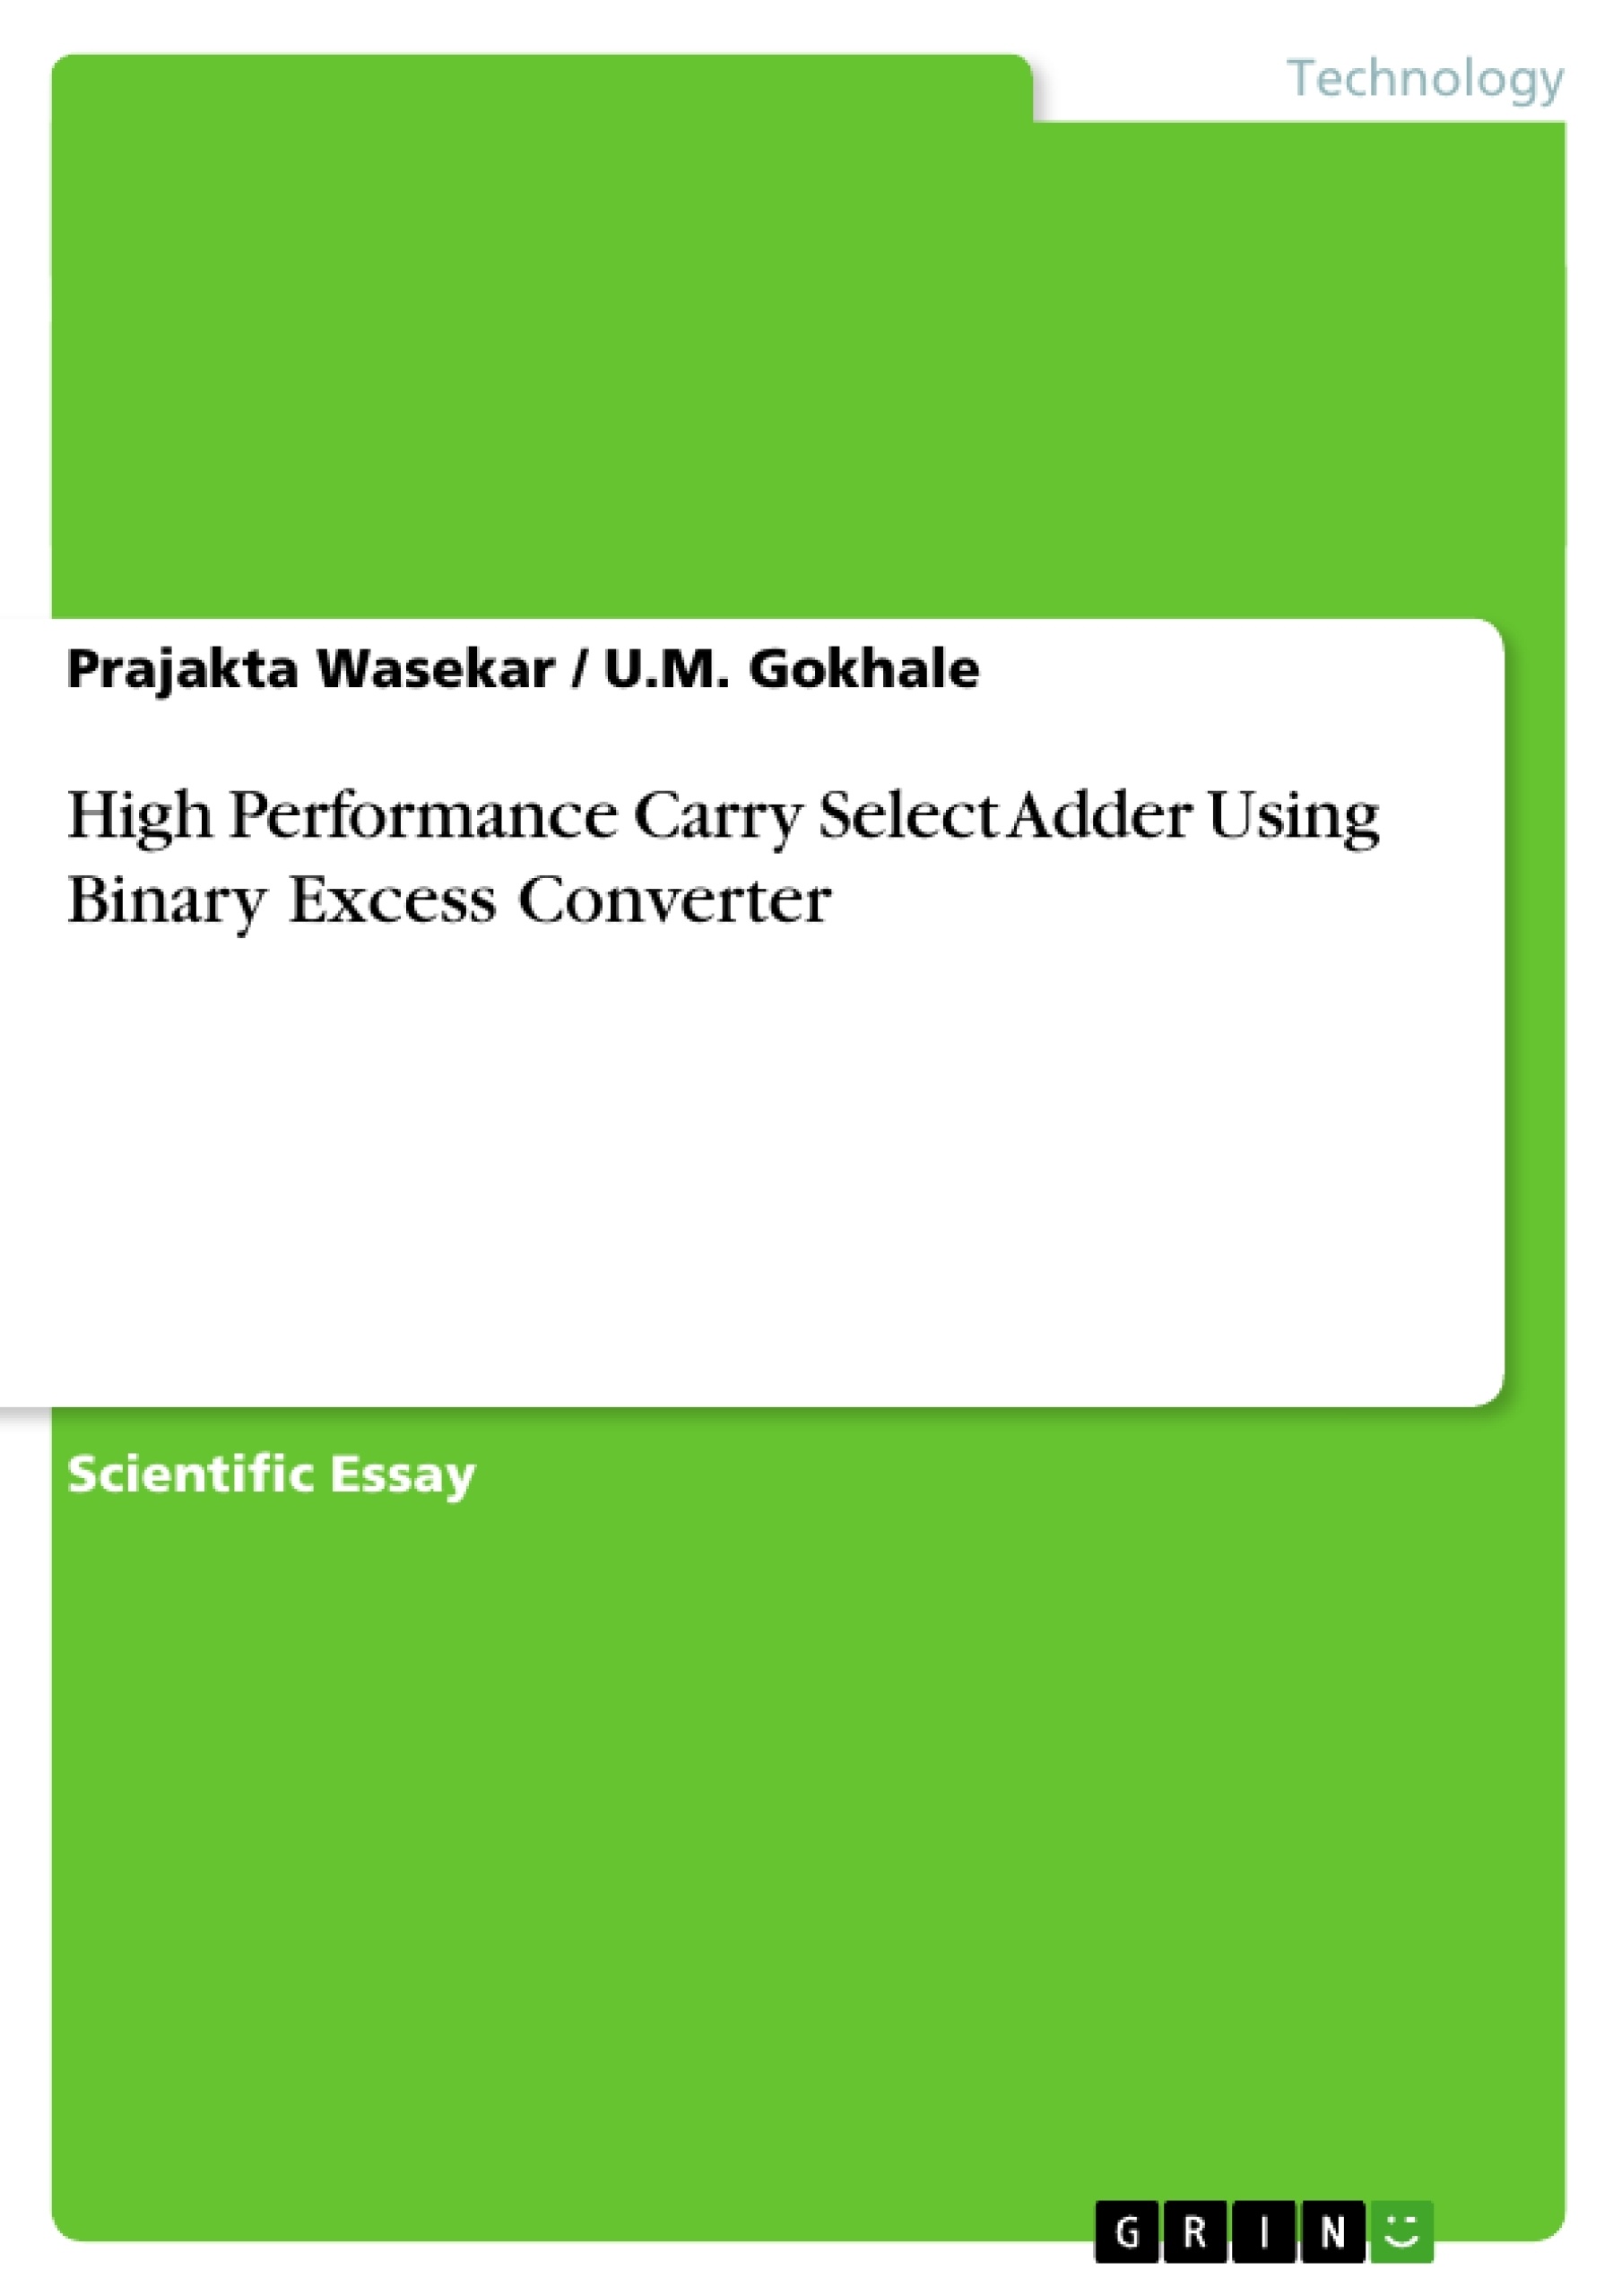 Titre: High Performance Carry Select Adder Using Binary Excess Converter